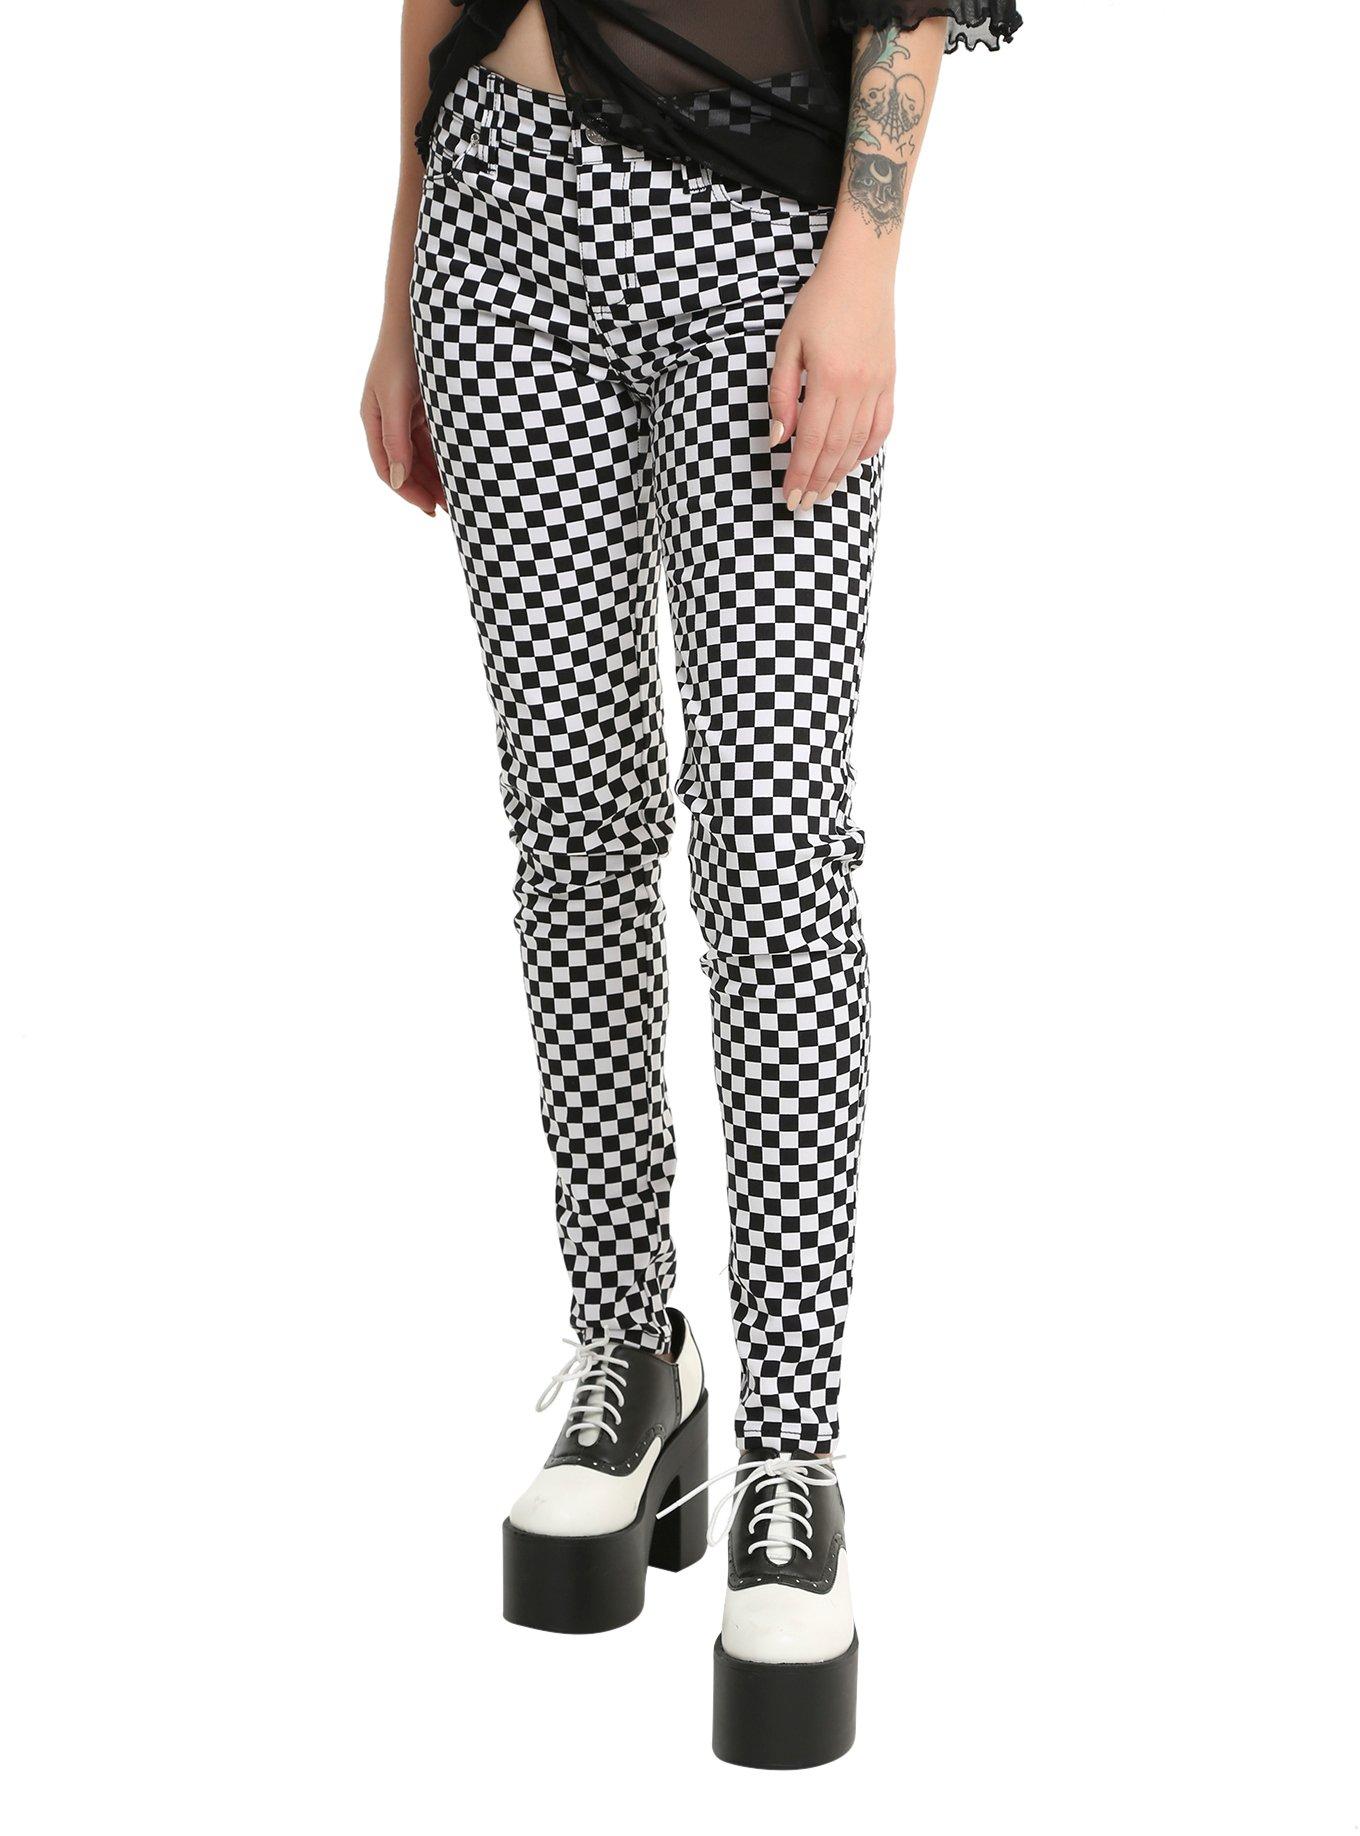 Pit Stop - High waisted black and white checkerboard print hot